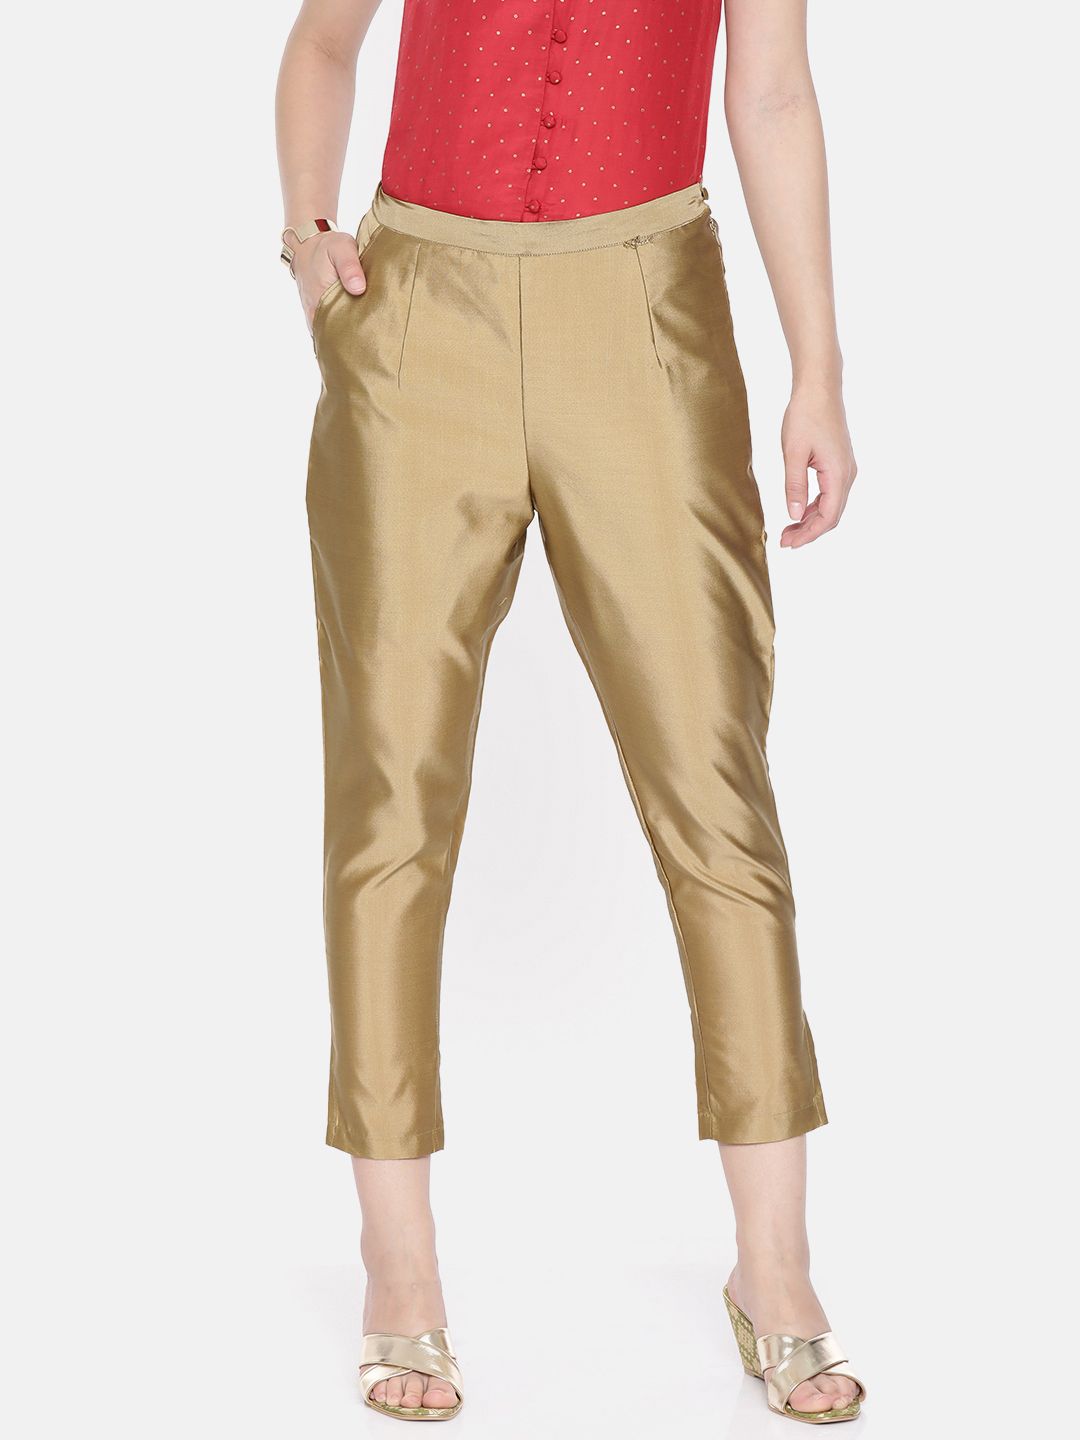 Ira Soleil Women Gold-Toned Regular Fit Solid Cropped Regular Trousers Price in India